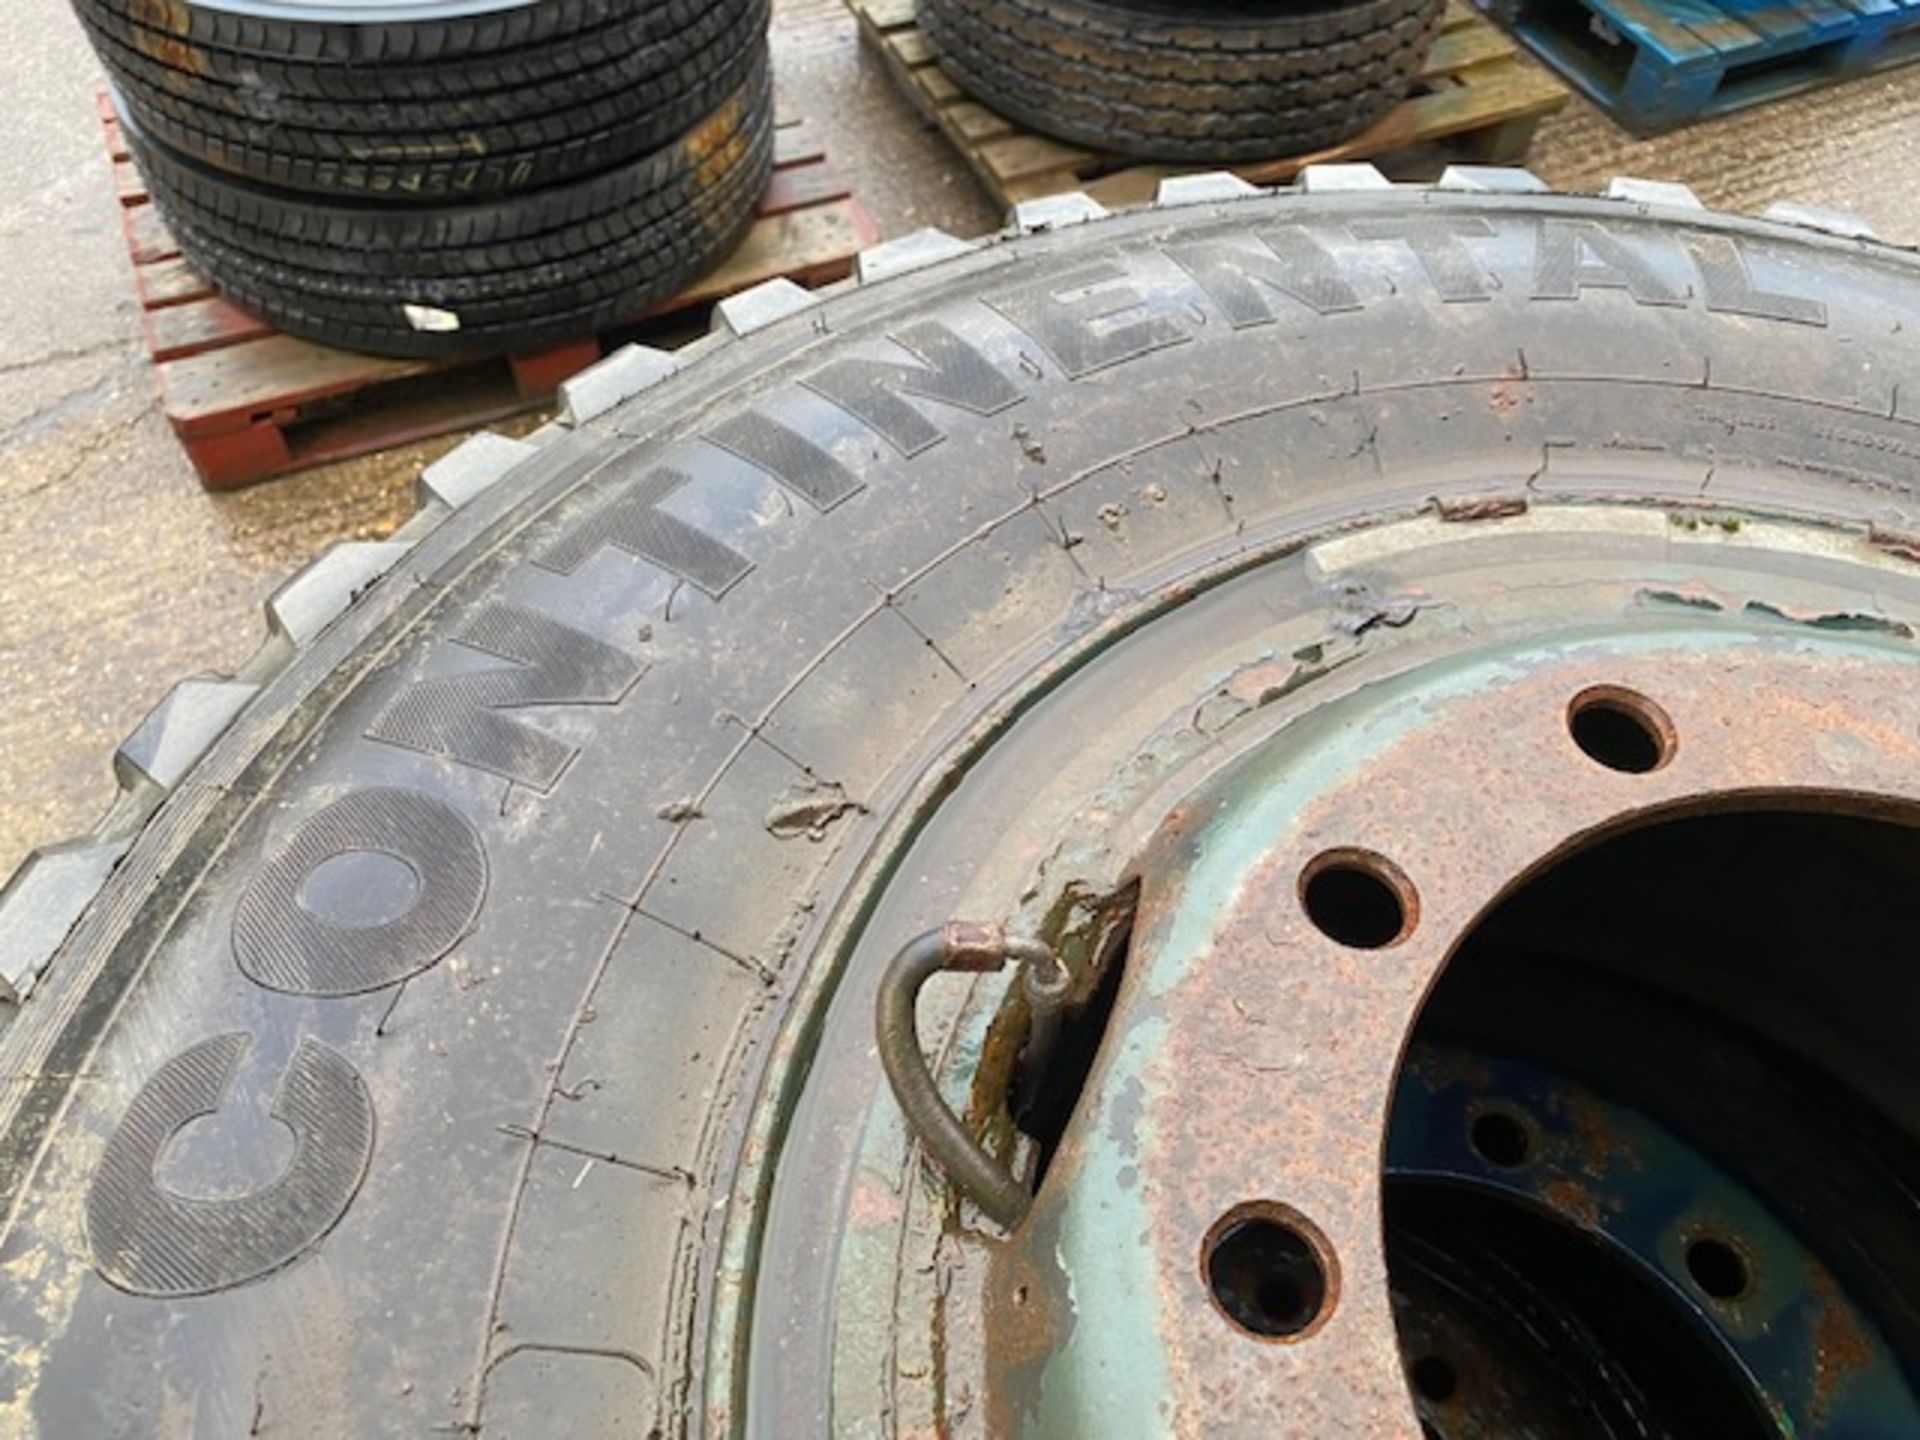 Qty 4 x Continental 12.00R20 HSC Construction tyres on 10 stud split rims - Image 6 of 7